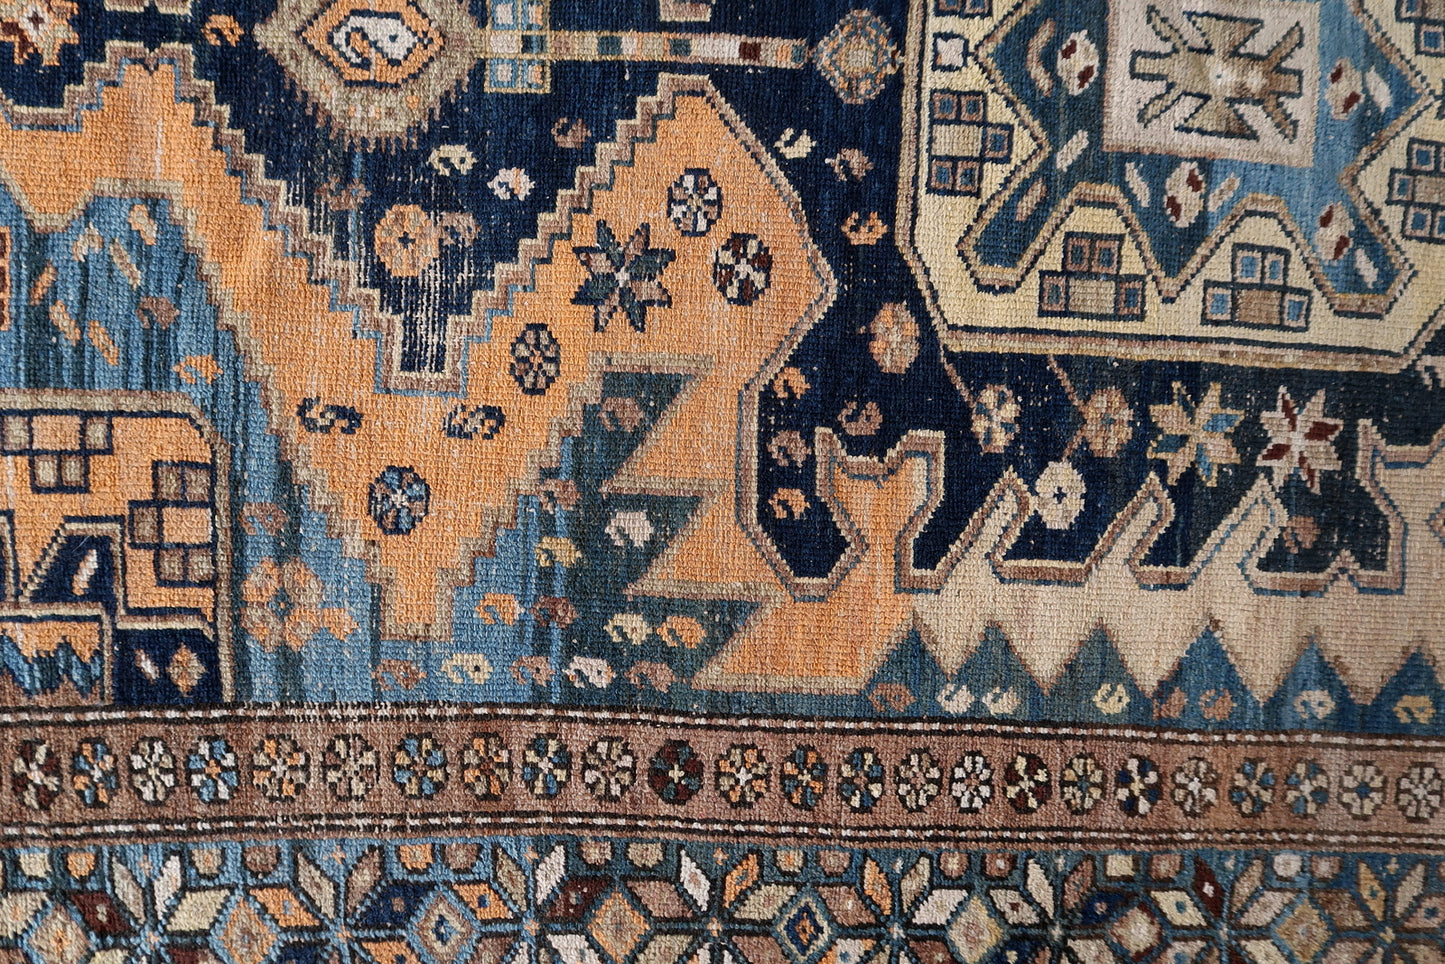 Close-up of rugged beauty on Handmade Antique Caucasian Shirvan Rug - Detailed view capturing the rugged beauty evoked by the color palette.